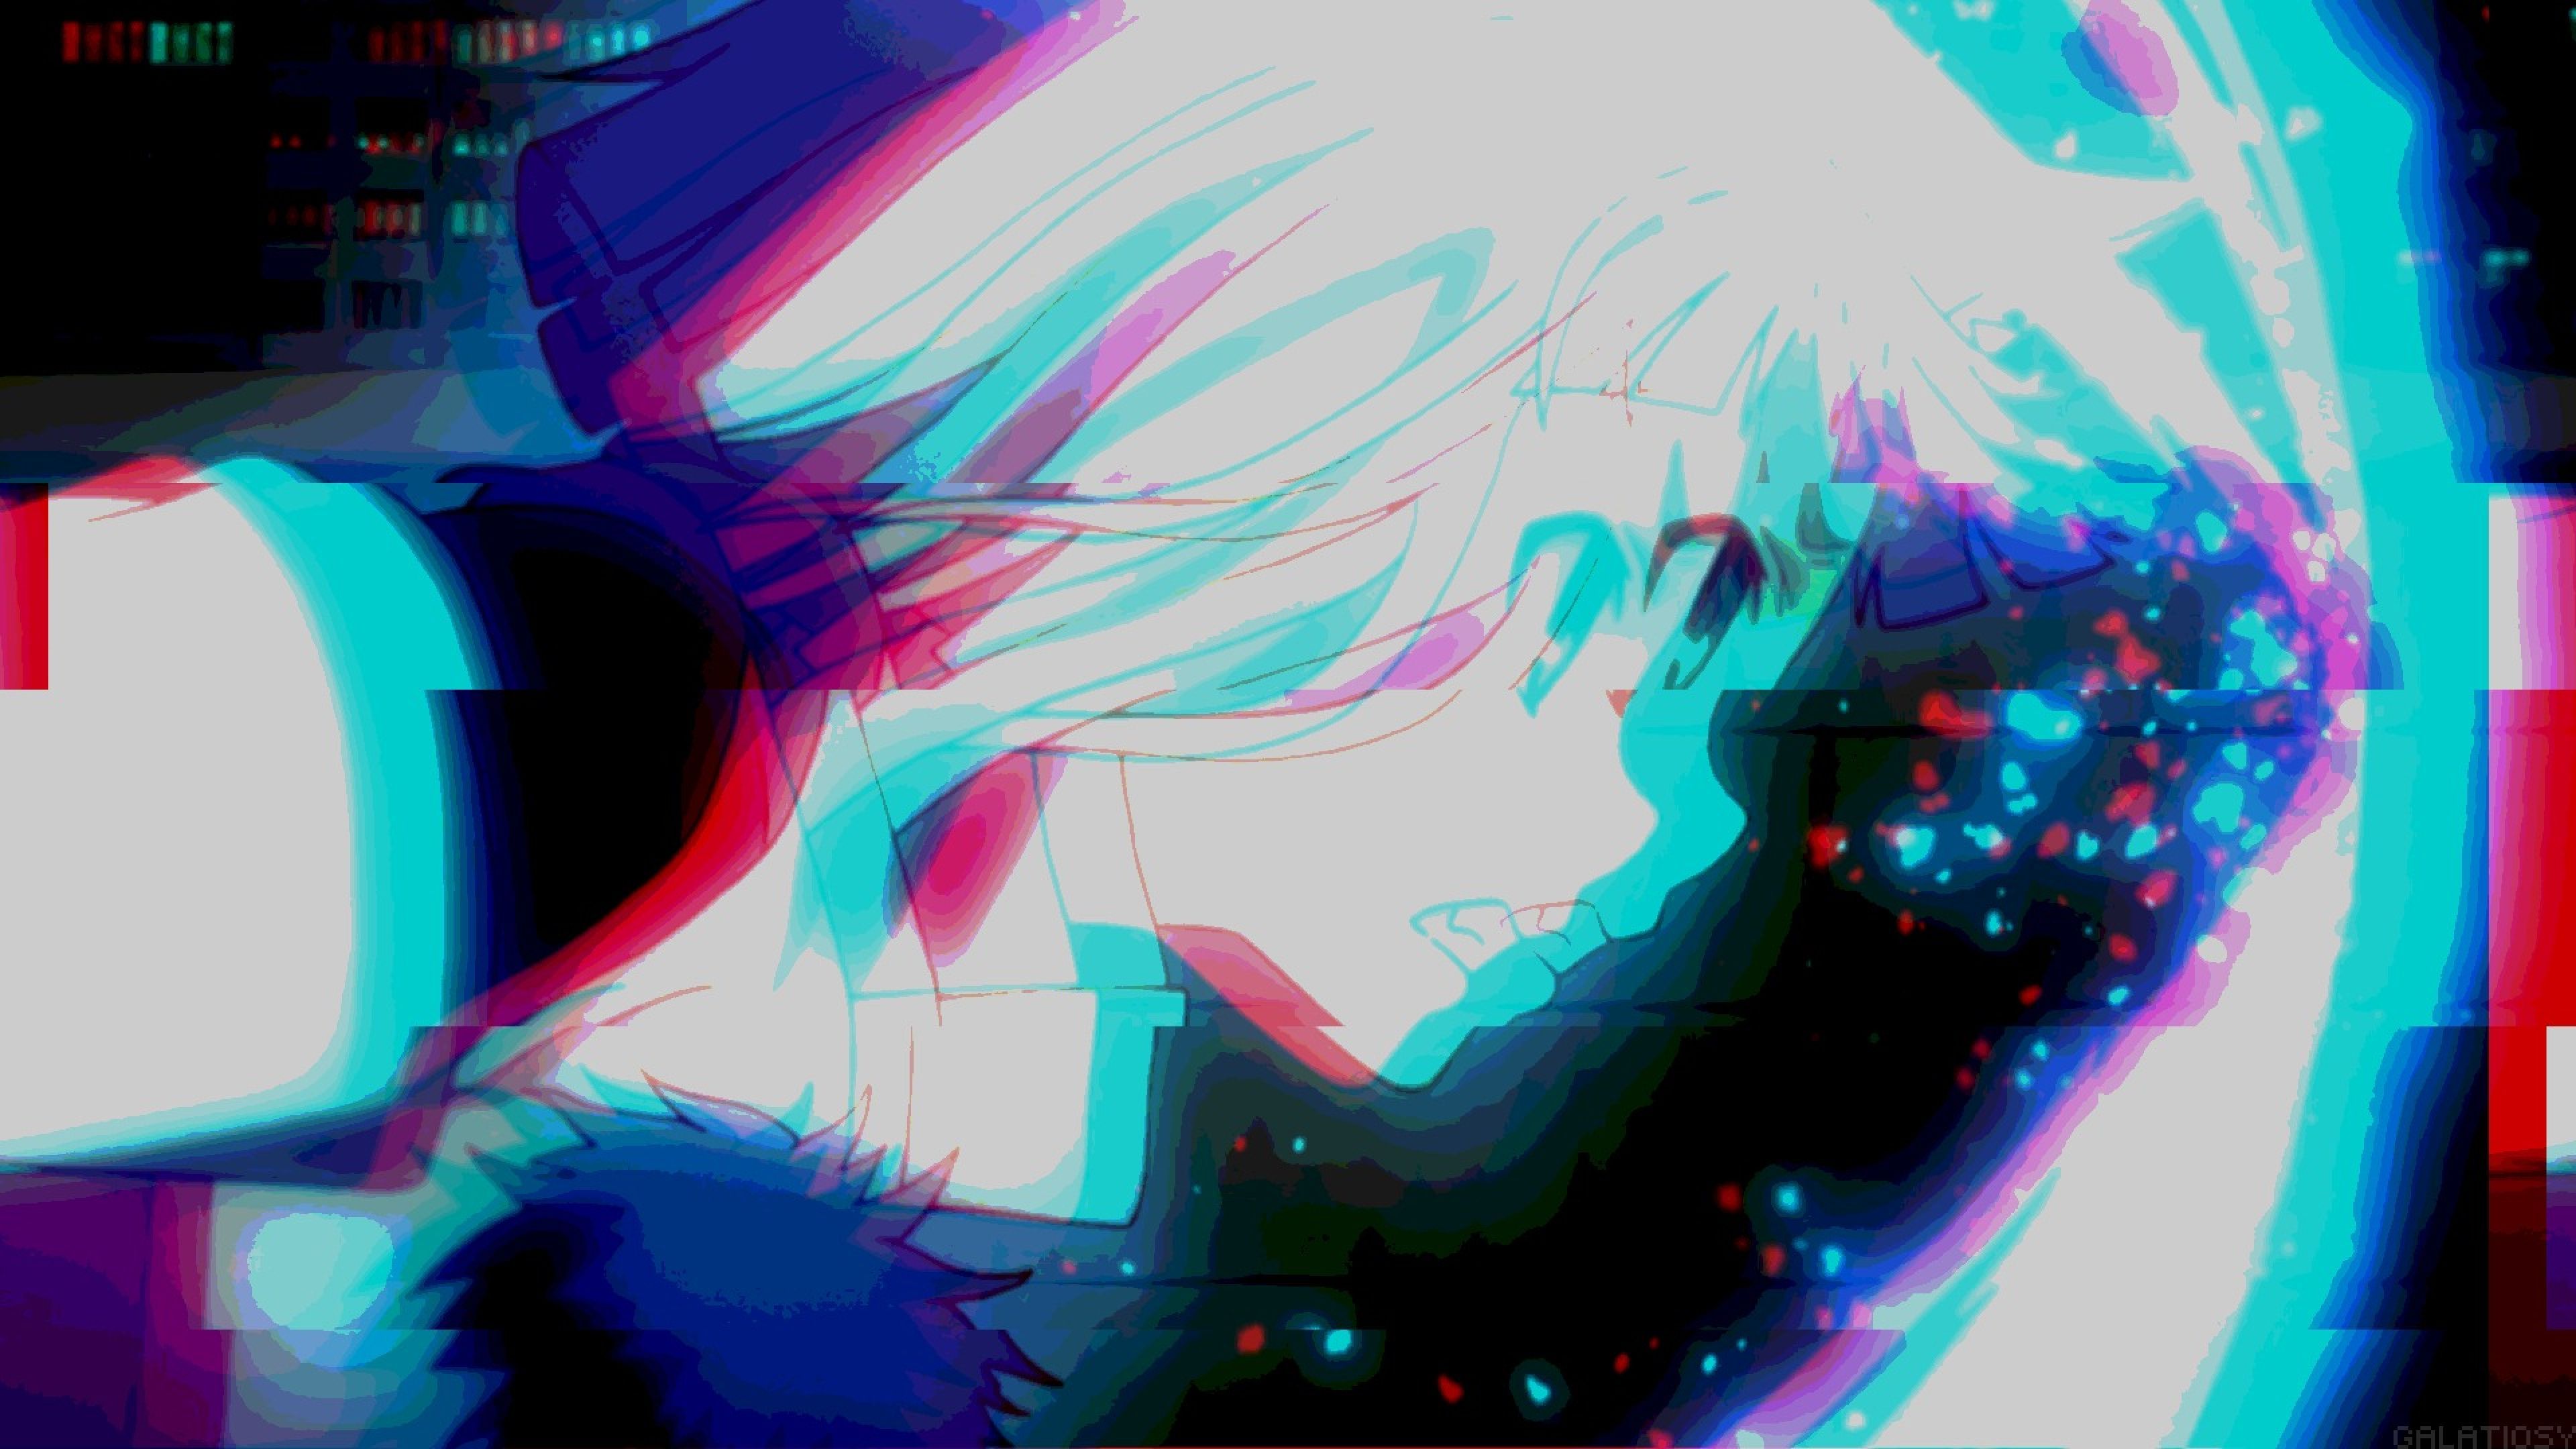 Tokyo Ghoul anime background with a character and a blue and red filter - Anime, 3840x2160, blue anime, Tokyo